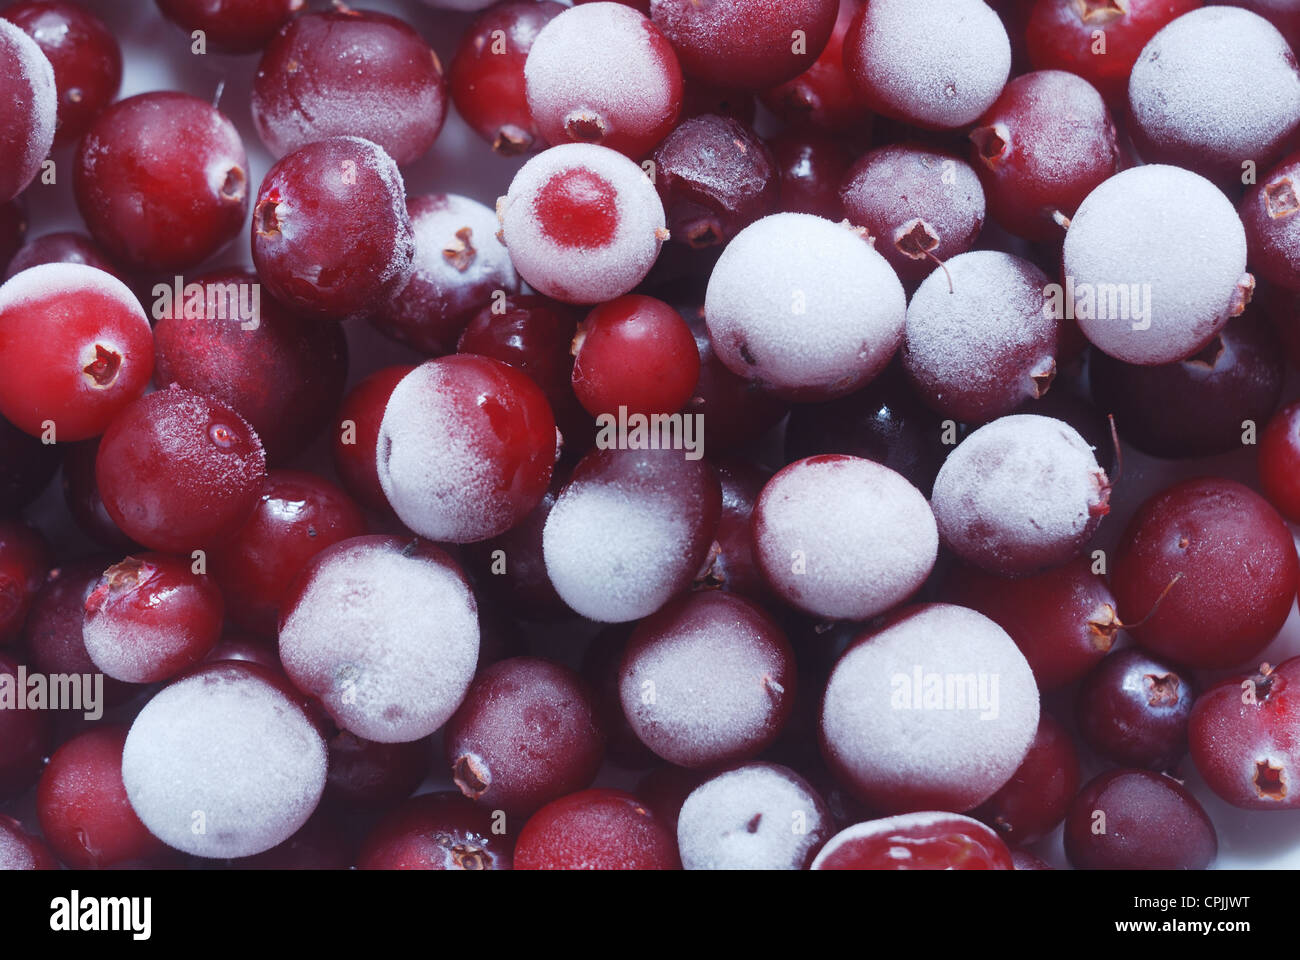 red frozen cranberries full frame, background, horizontal Stock Photo